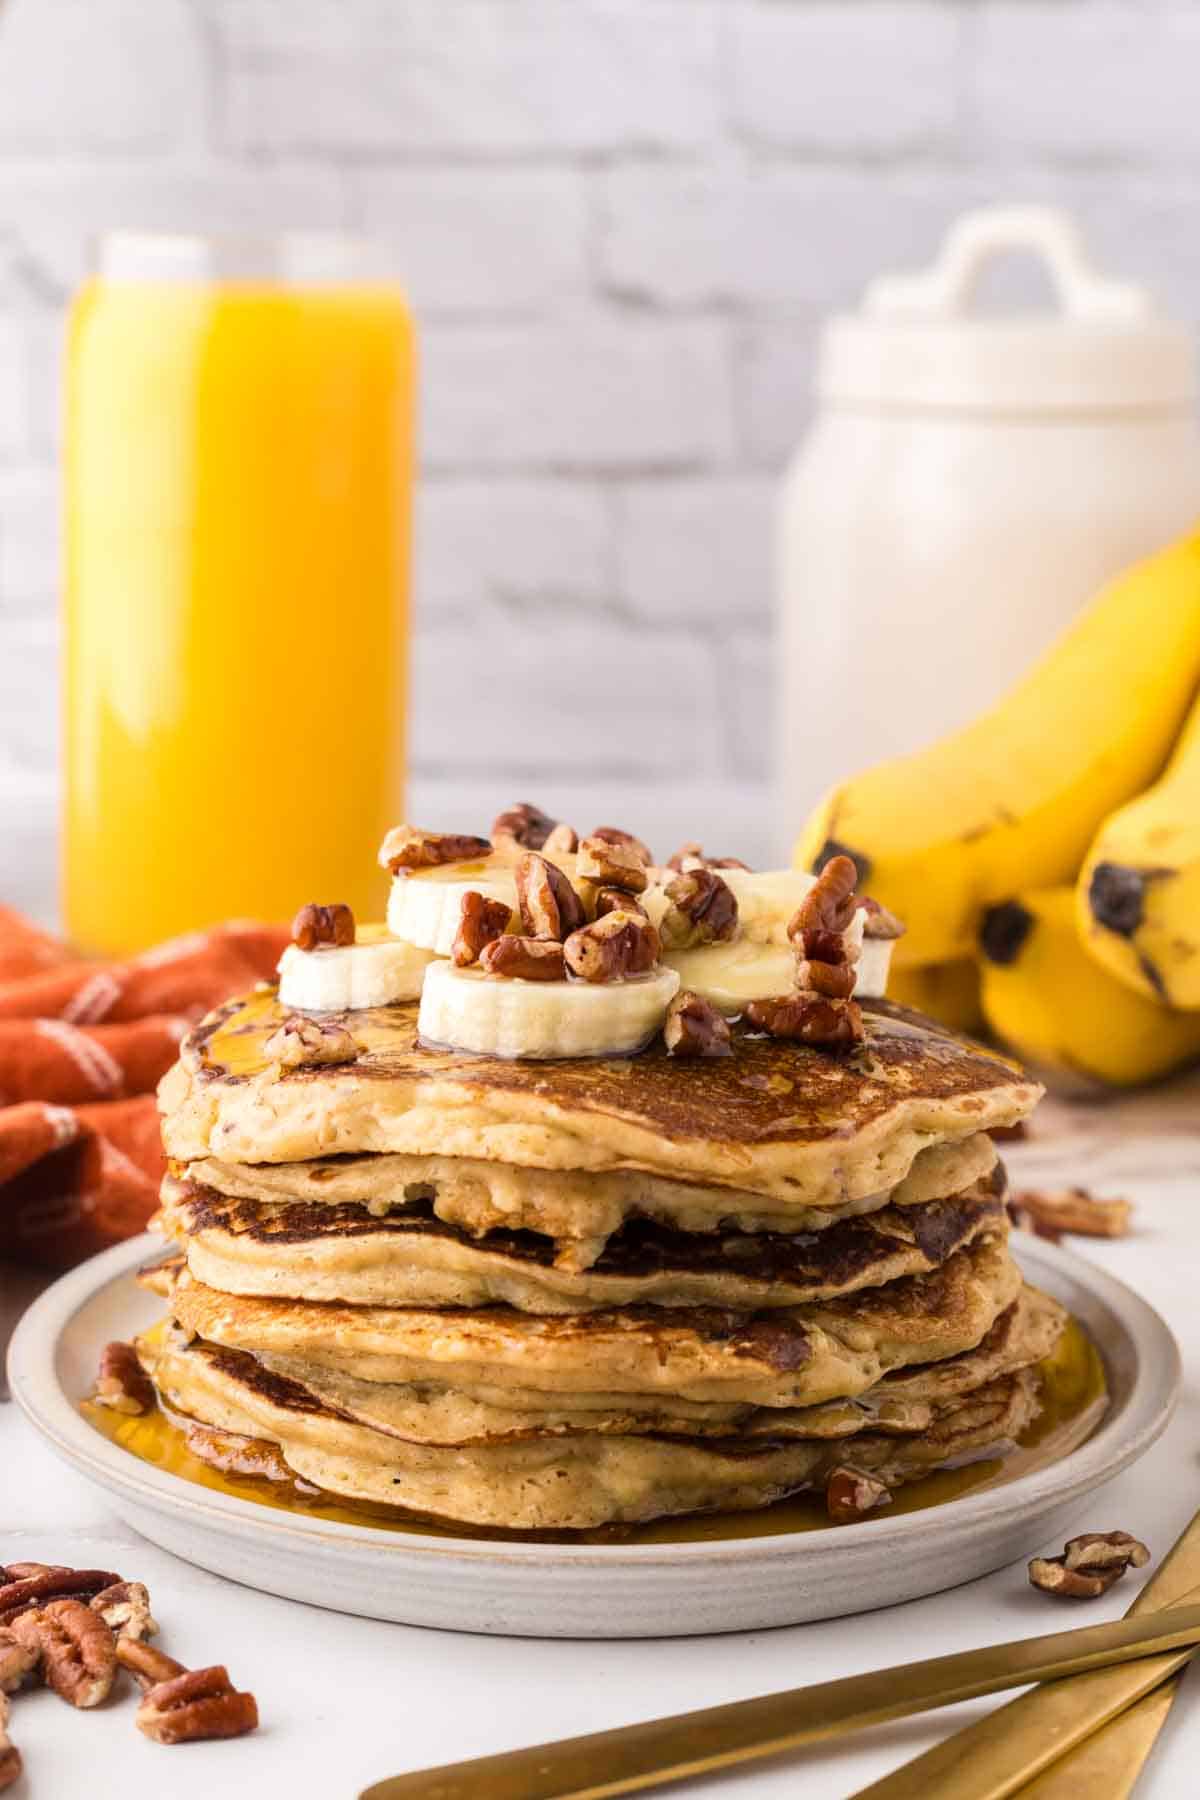 side view of a stack of banana pancakes on a round plate with walnuts and bananas with syrup on top